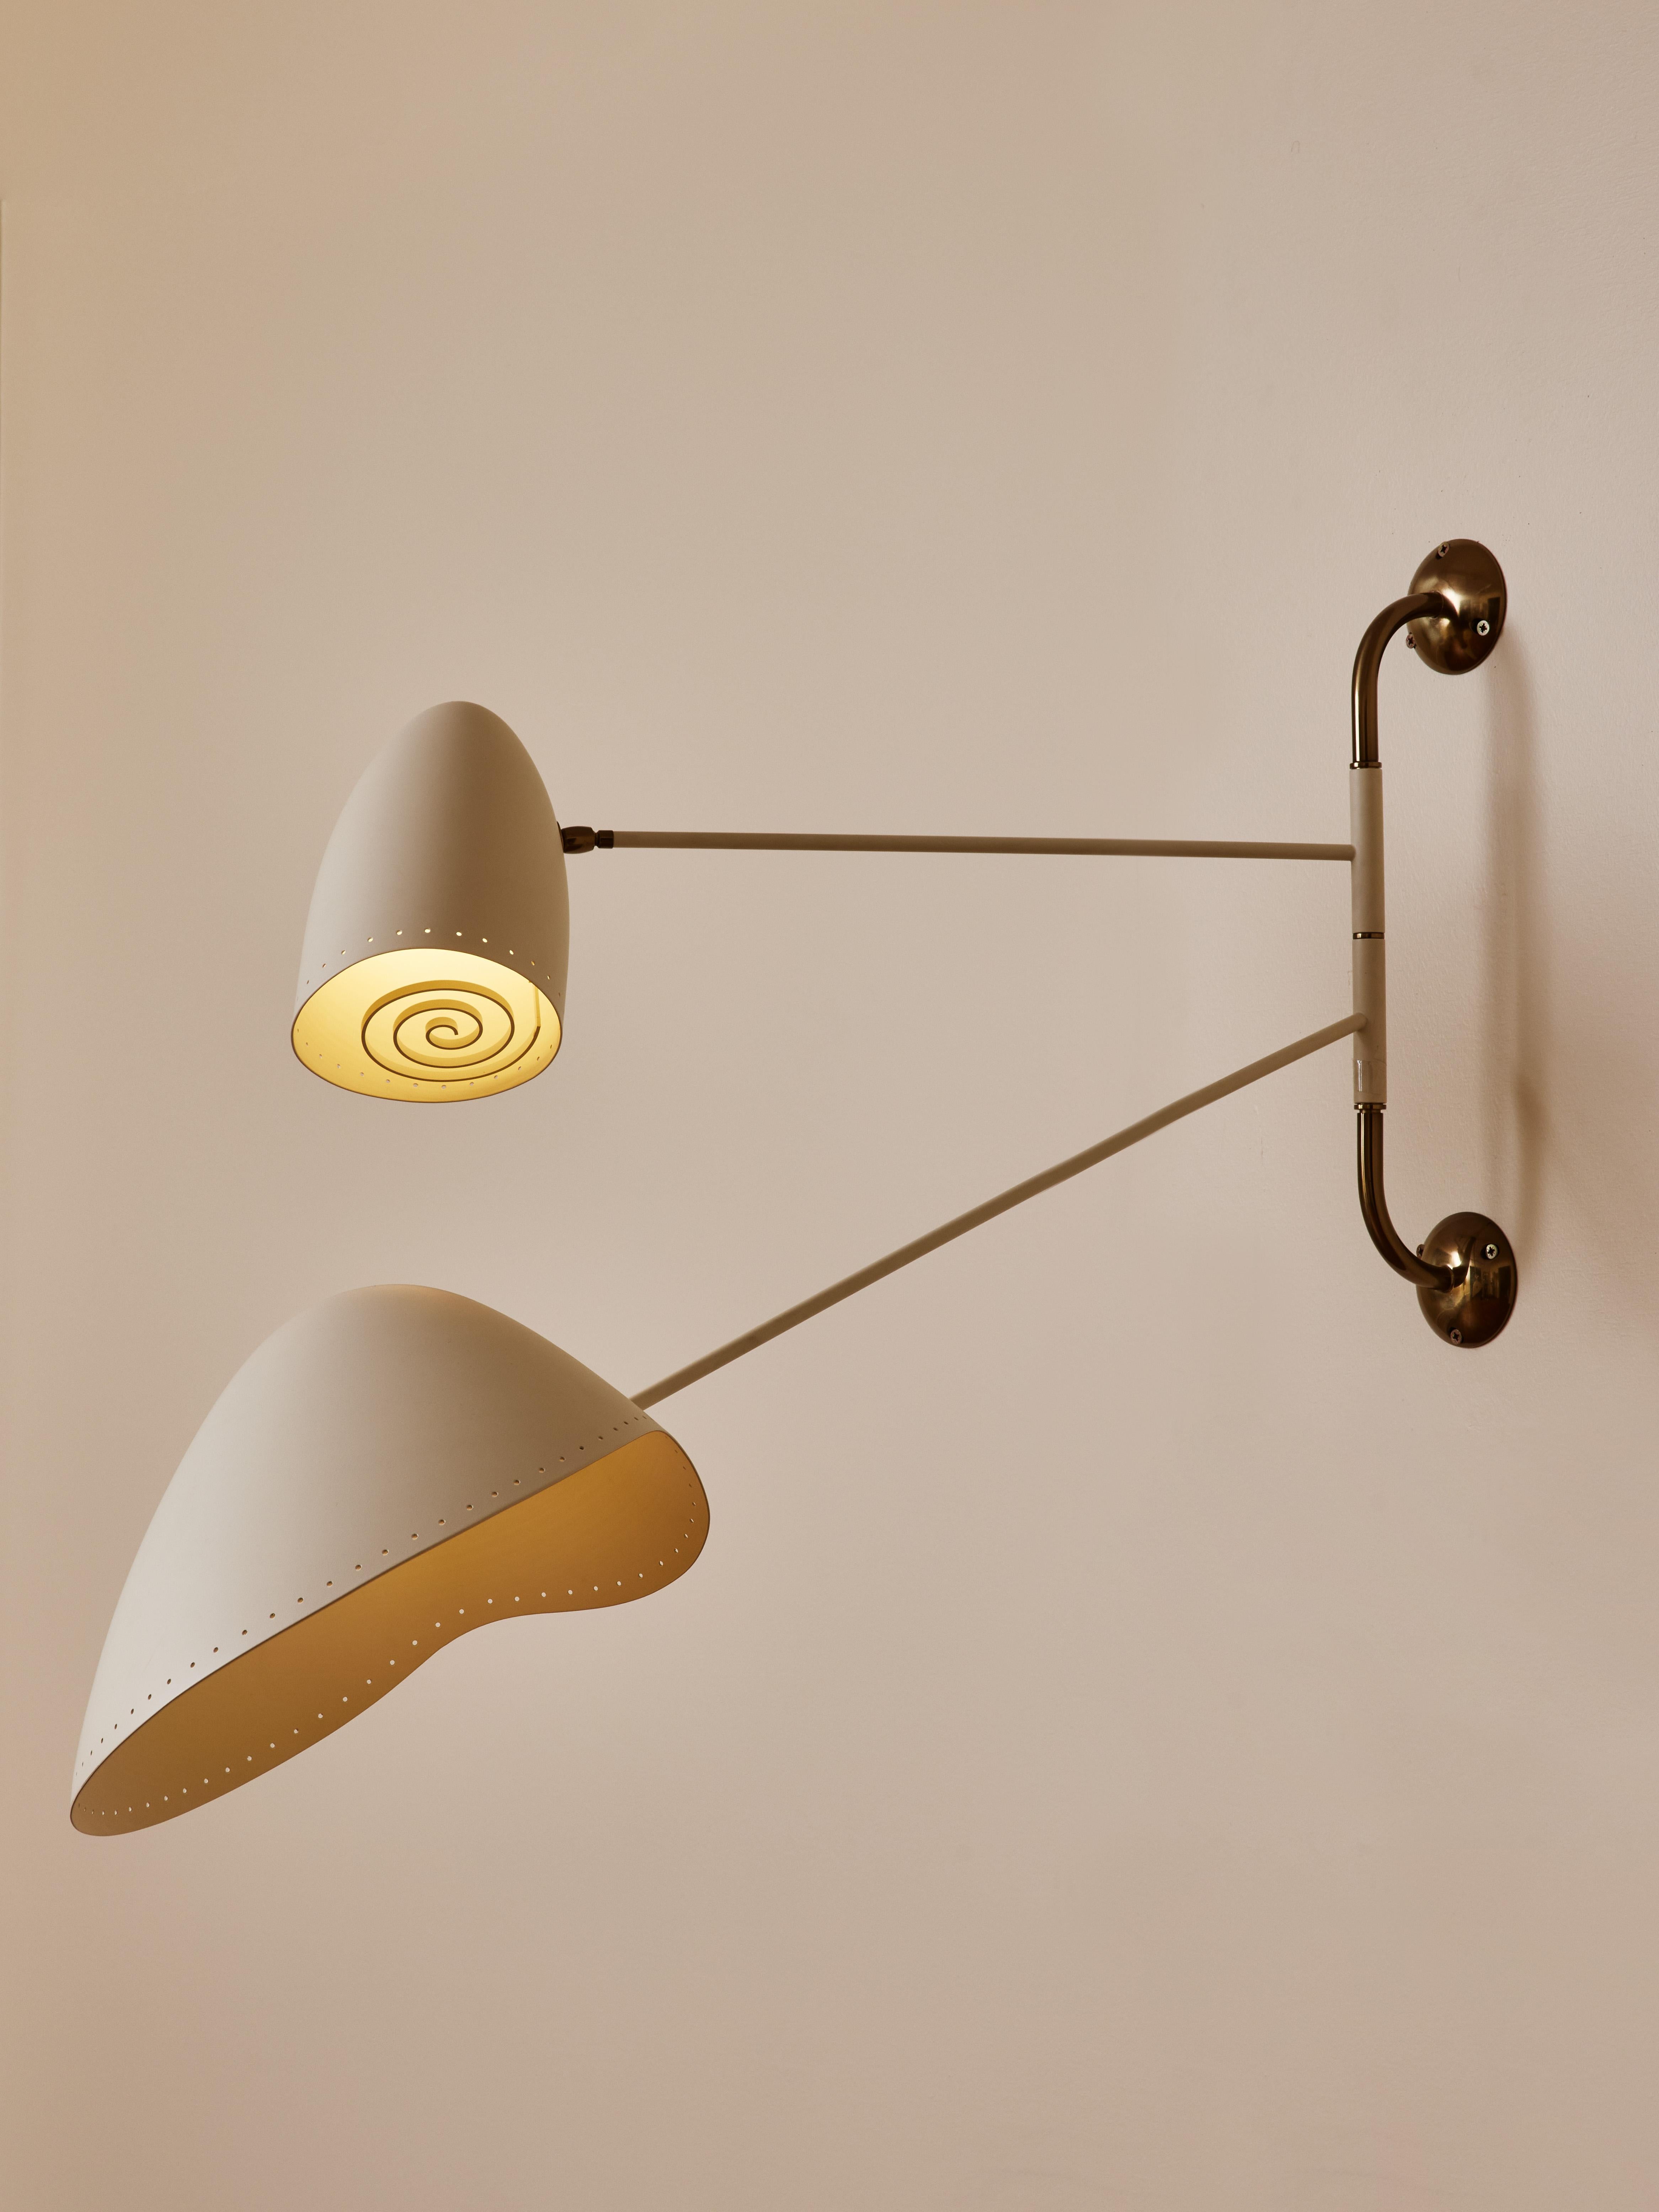 Amazing wall light with 2 arms in brass and off-white lacquered metal.
Numbered and signed piece by the artist Diego M.
Italy, 2022.